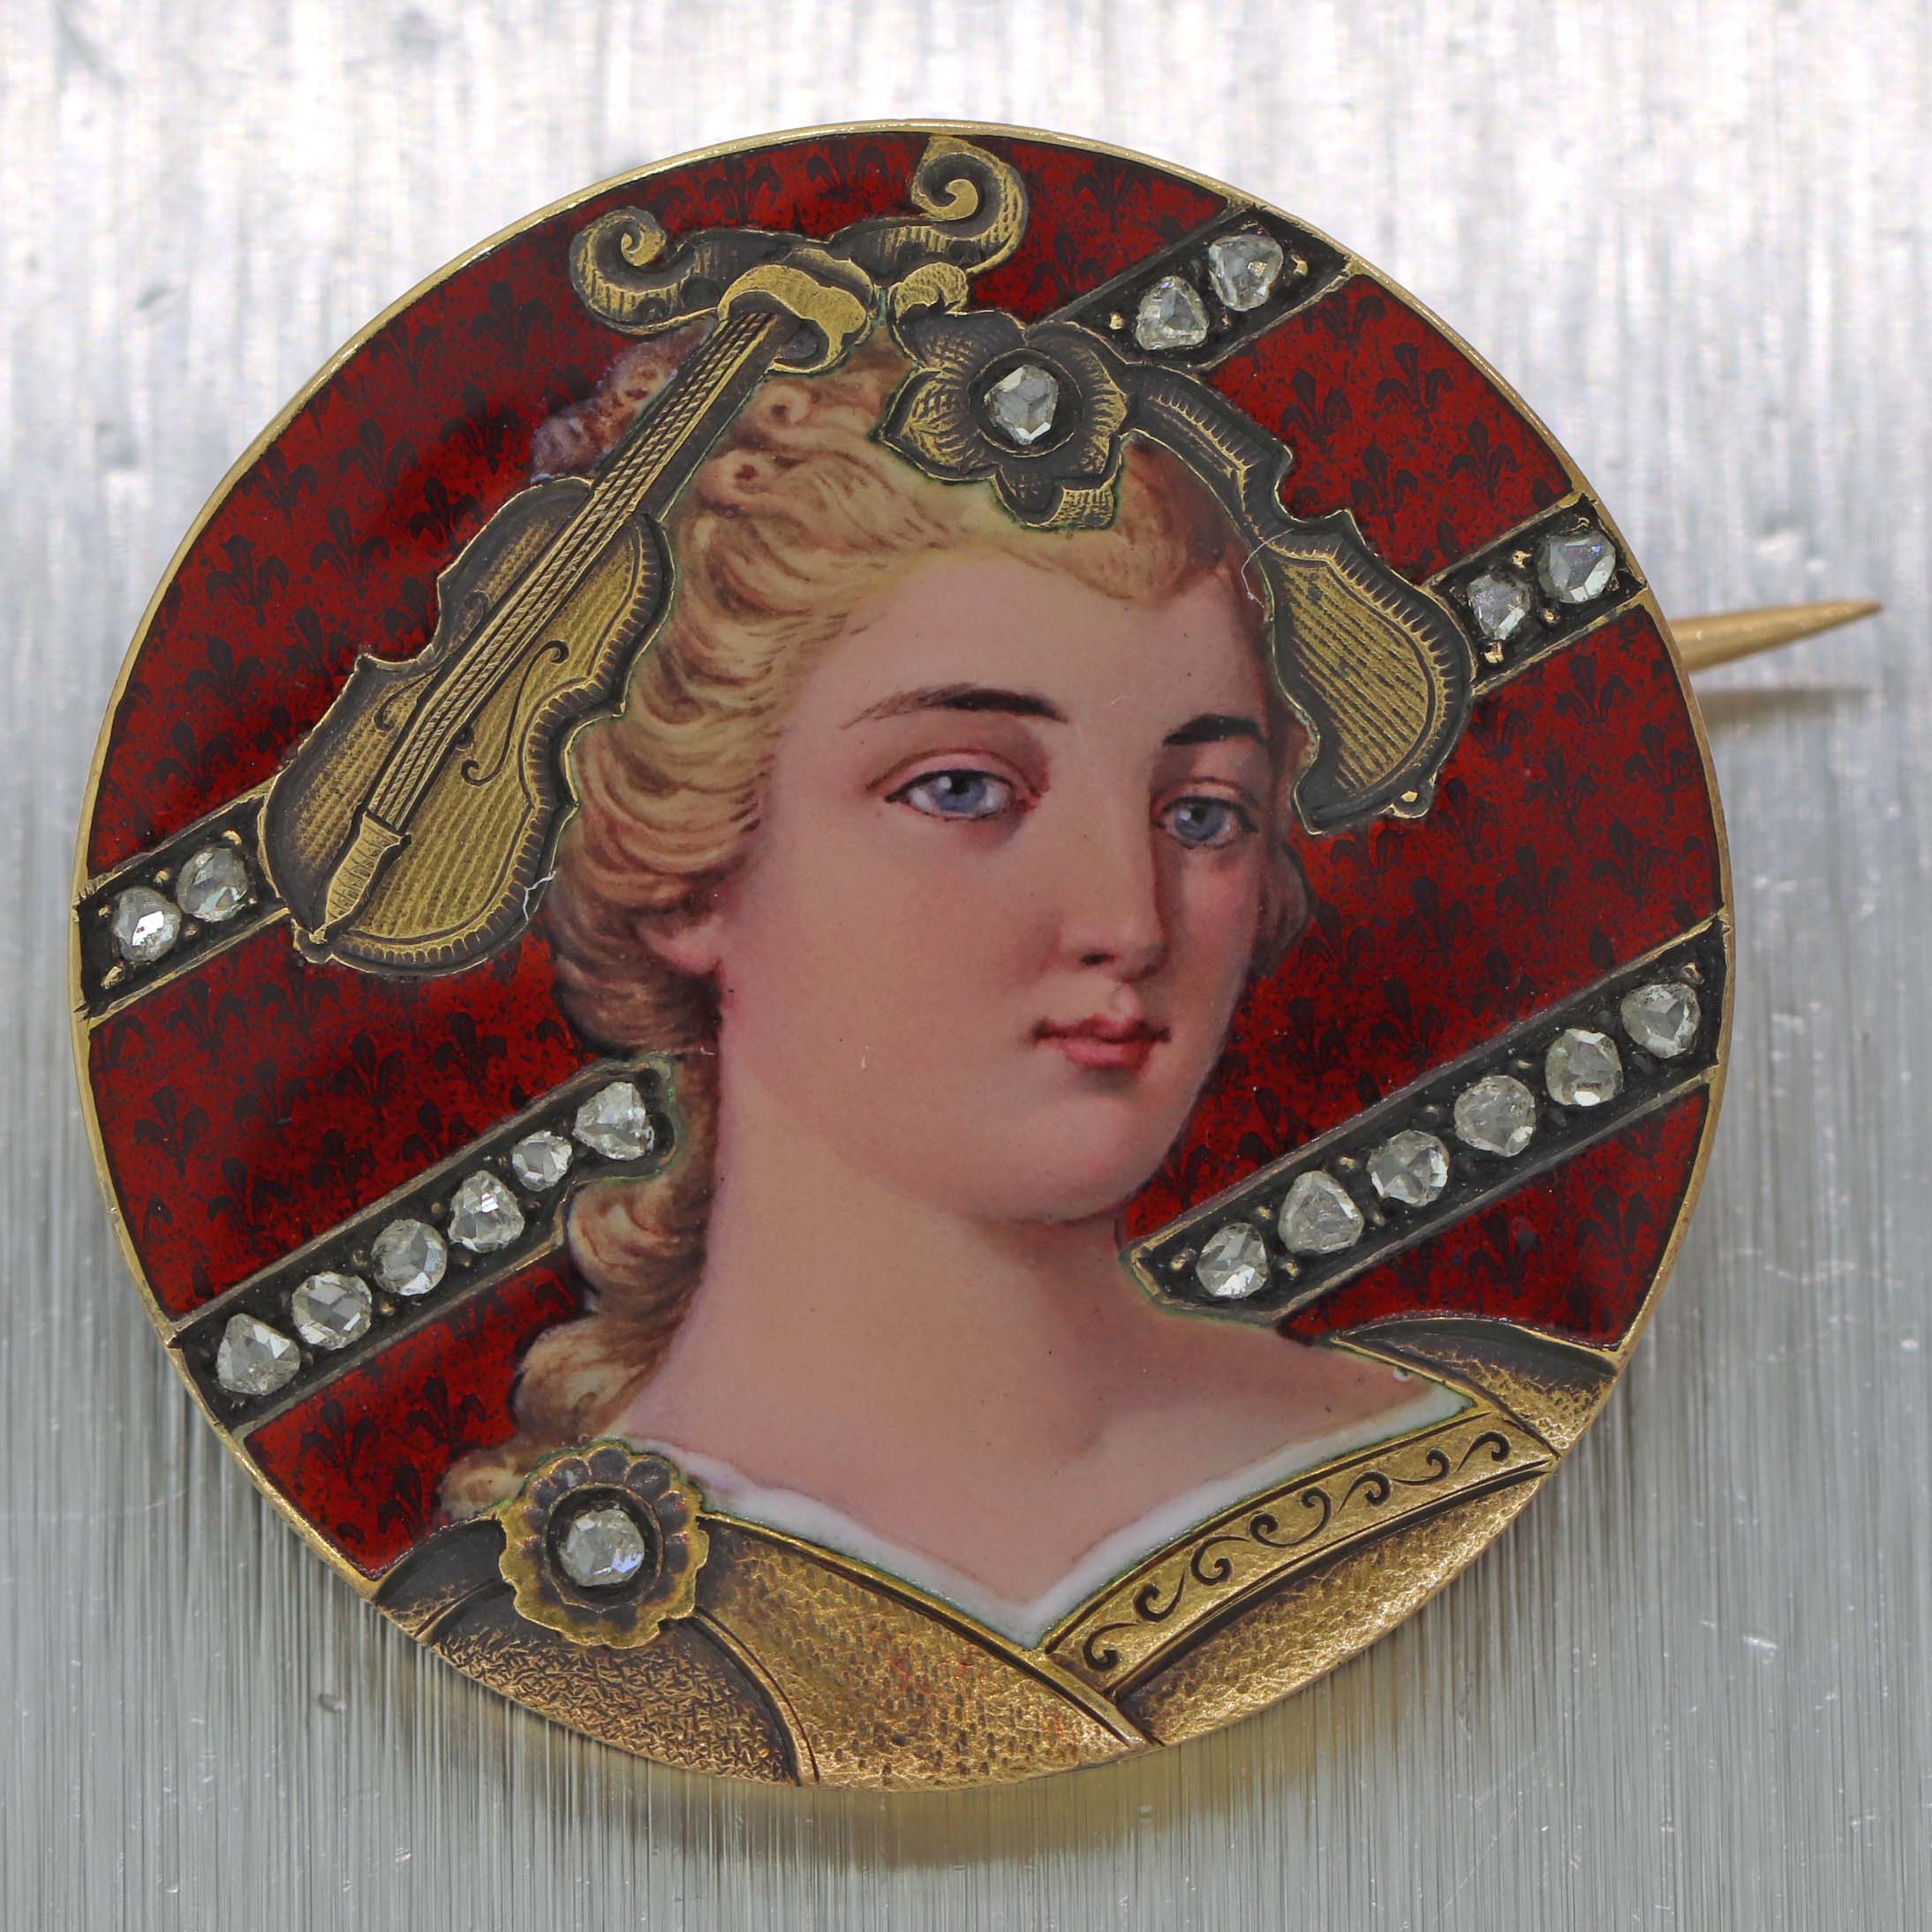 1850s Antique Victorian 18k Hand Painted Rose Diamond Violin Lady Portrait Brooch Pin